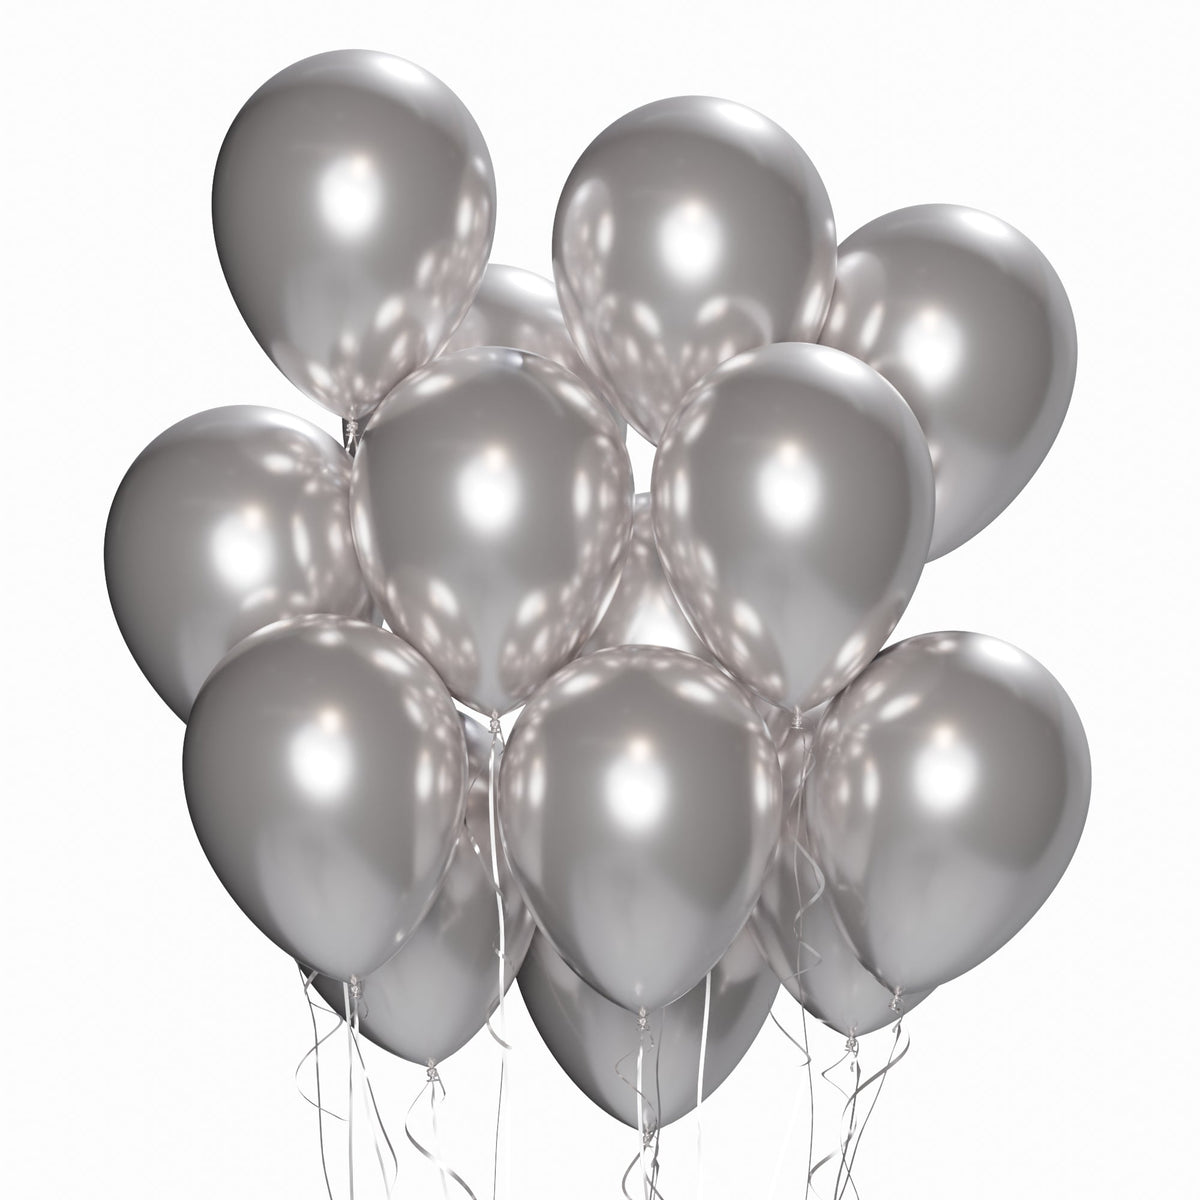 WIDE OCEAN INTERNATIONAL TRADE BEIJING CO., LTD Balloons Silver Latex Balloon 12 Inches, Chrome Collection, 15 Count 810064198373